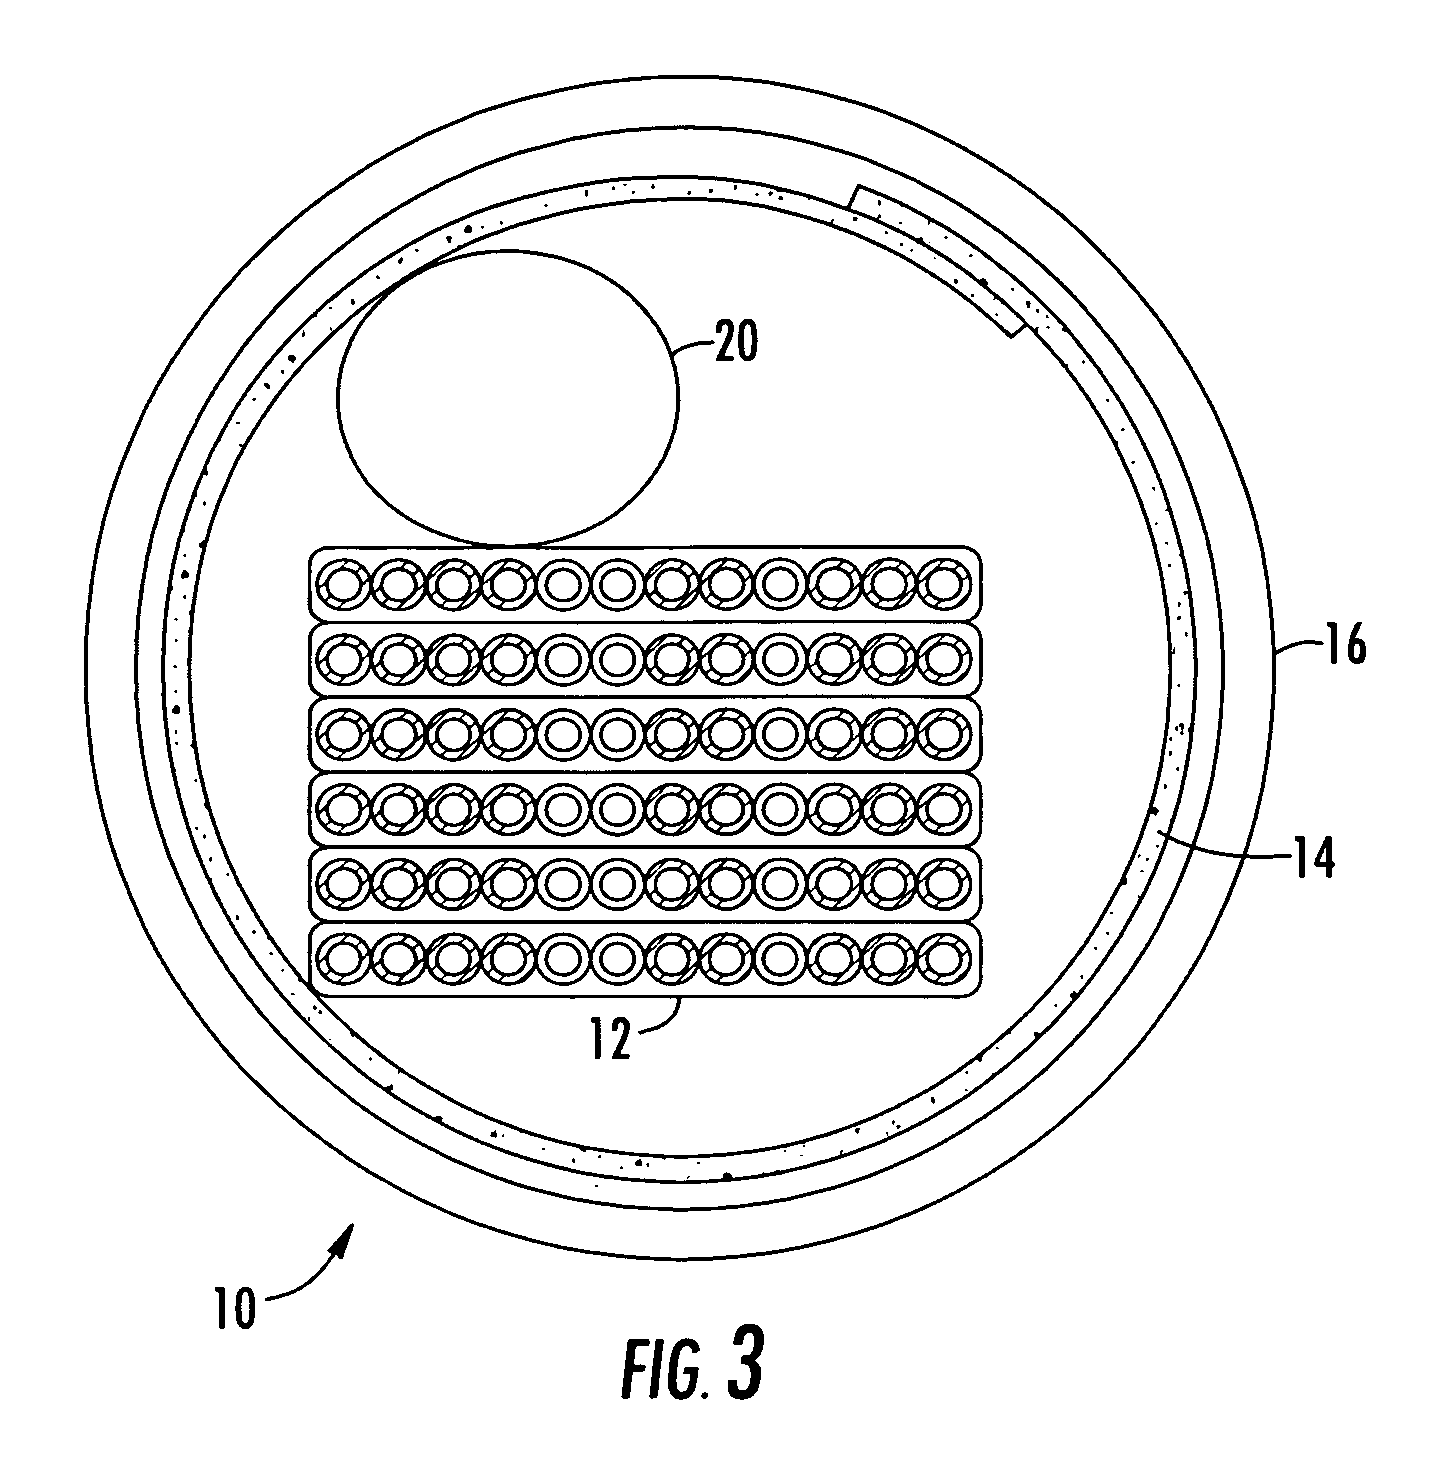 Gel-free buffer tube with adhesively coupled optical element